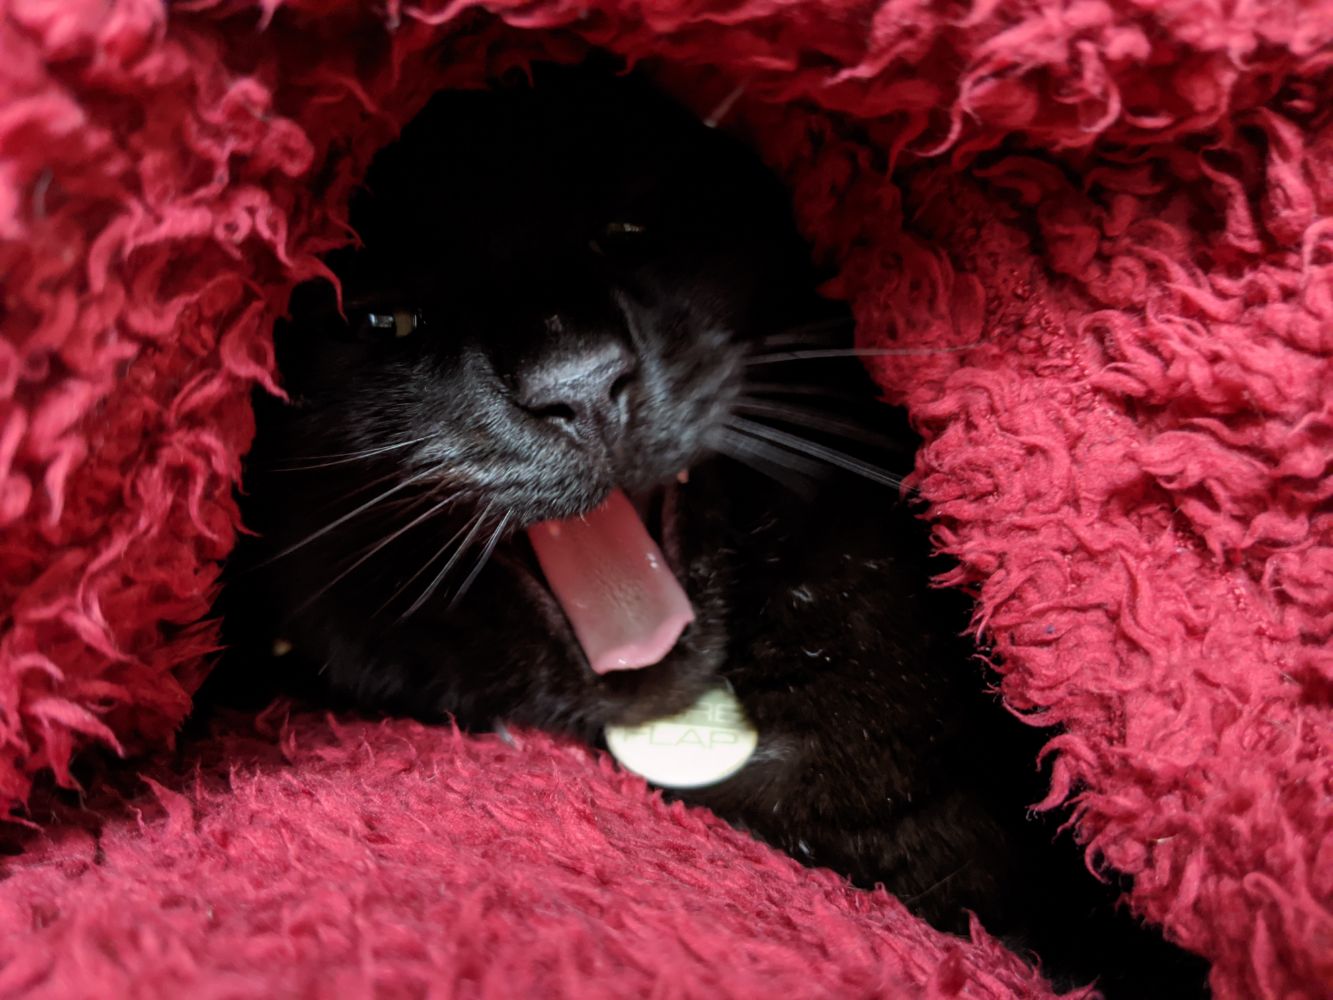 Black cat yawning under a red blanket cave wrapped around him